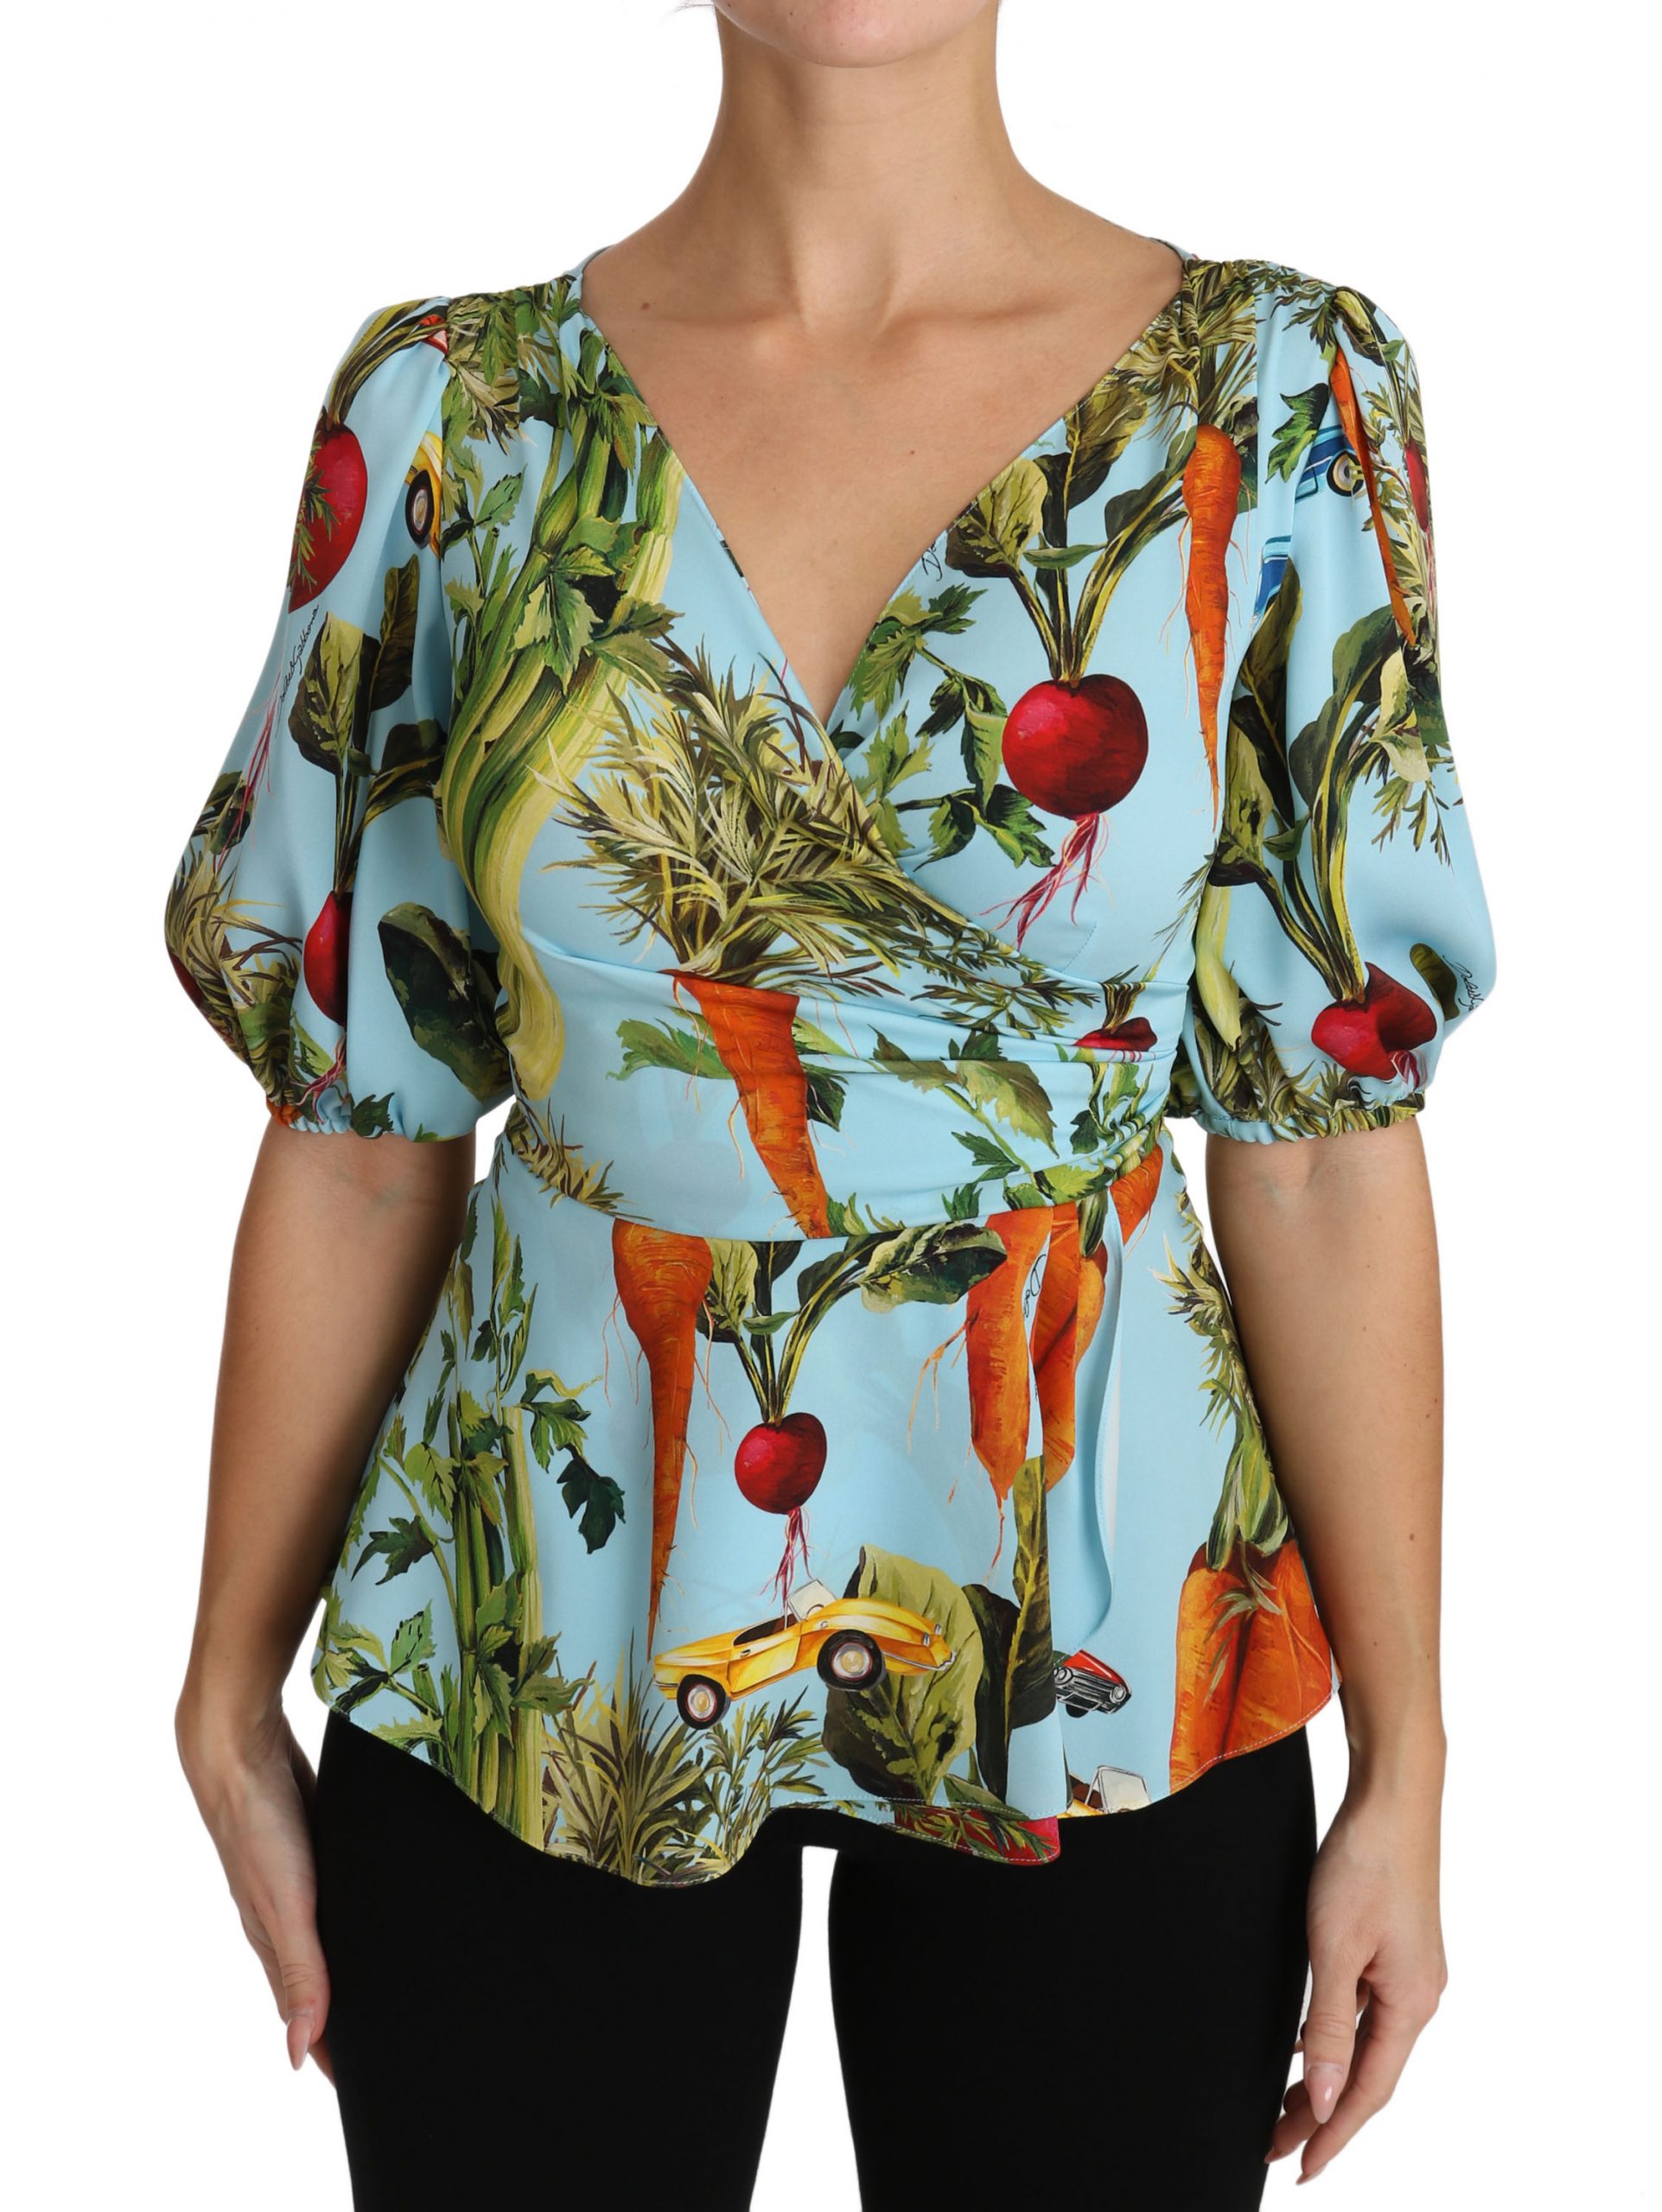 dolce and gabbana wrap top